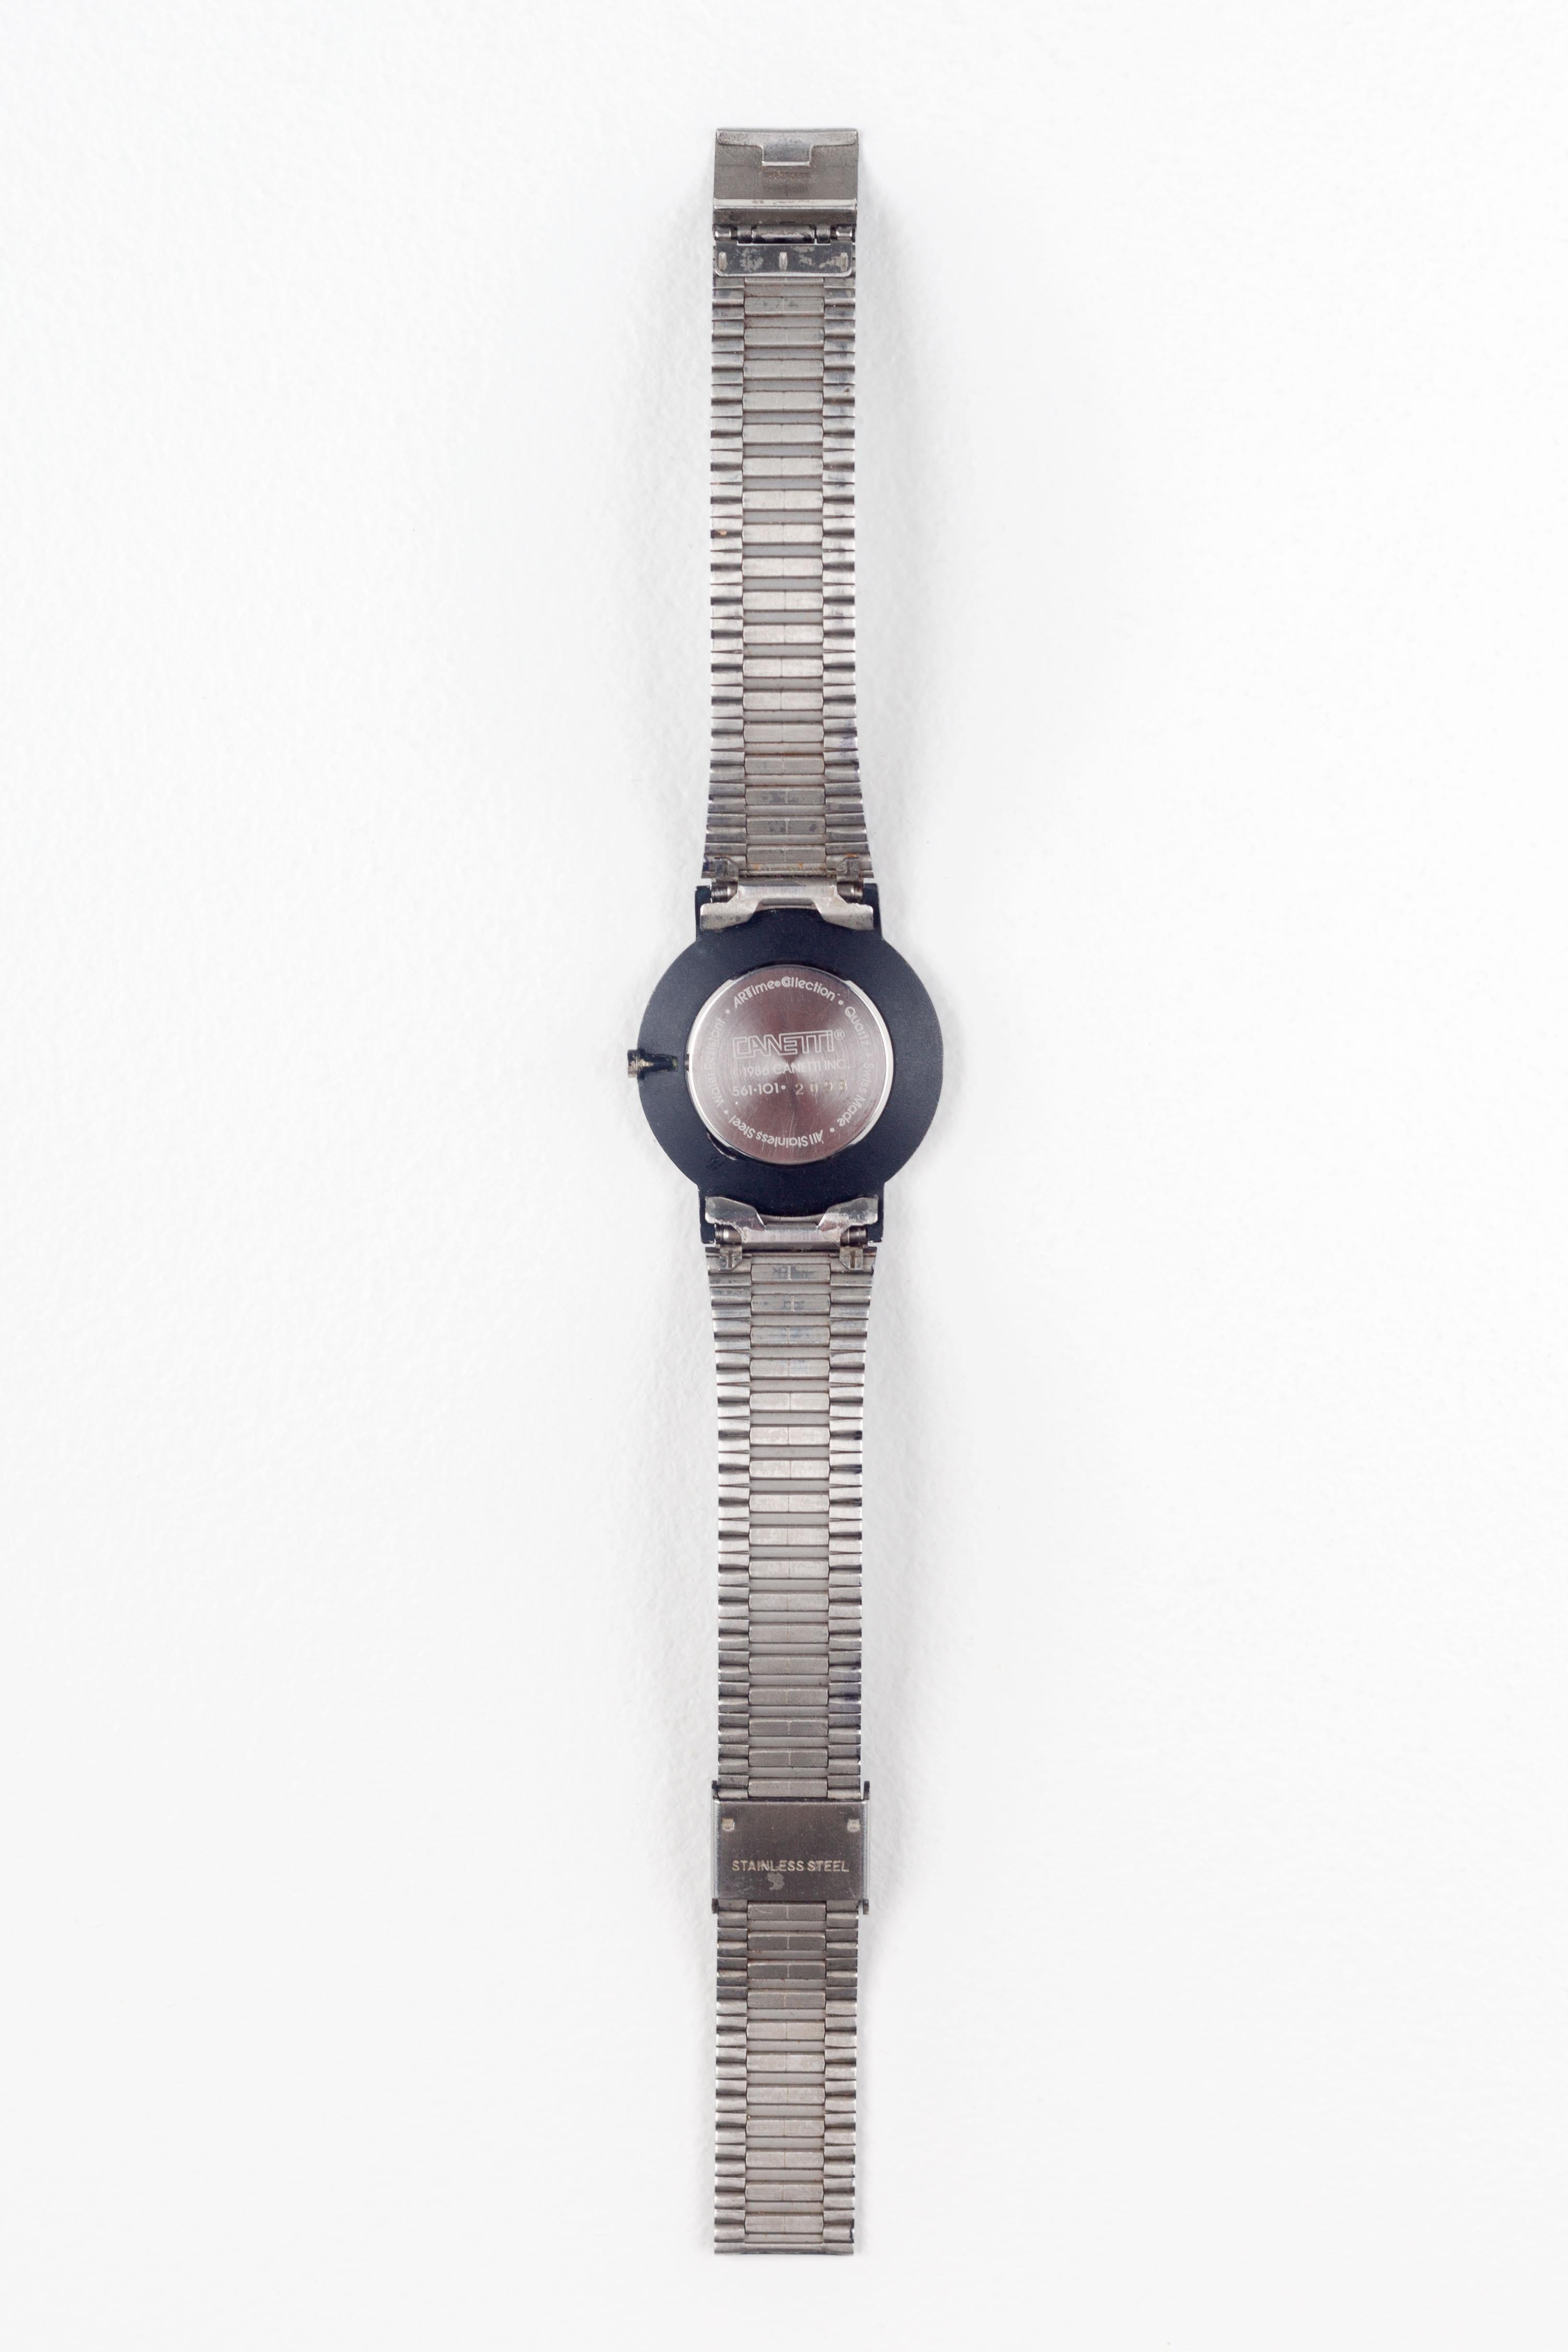 Memphis Postmodern Wristwatch by Nicolai Canetti for Artime, 1986 Swiss made In Good Condition For Sale In Chicago, IL